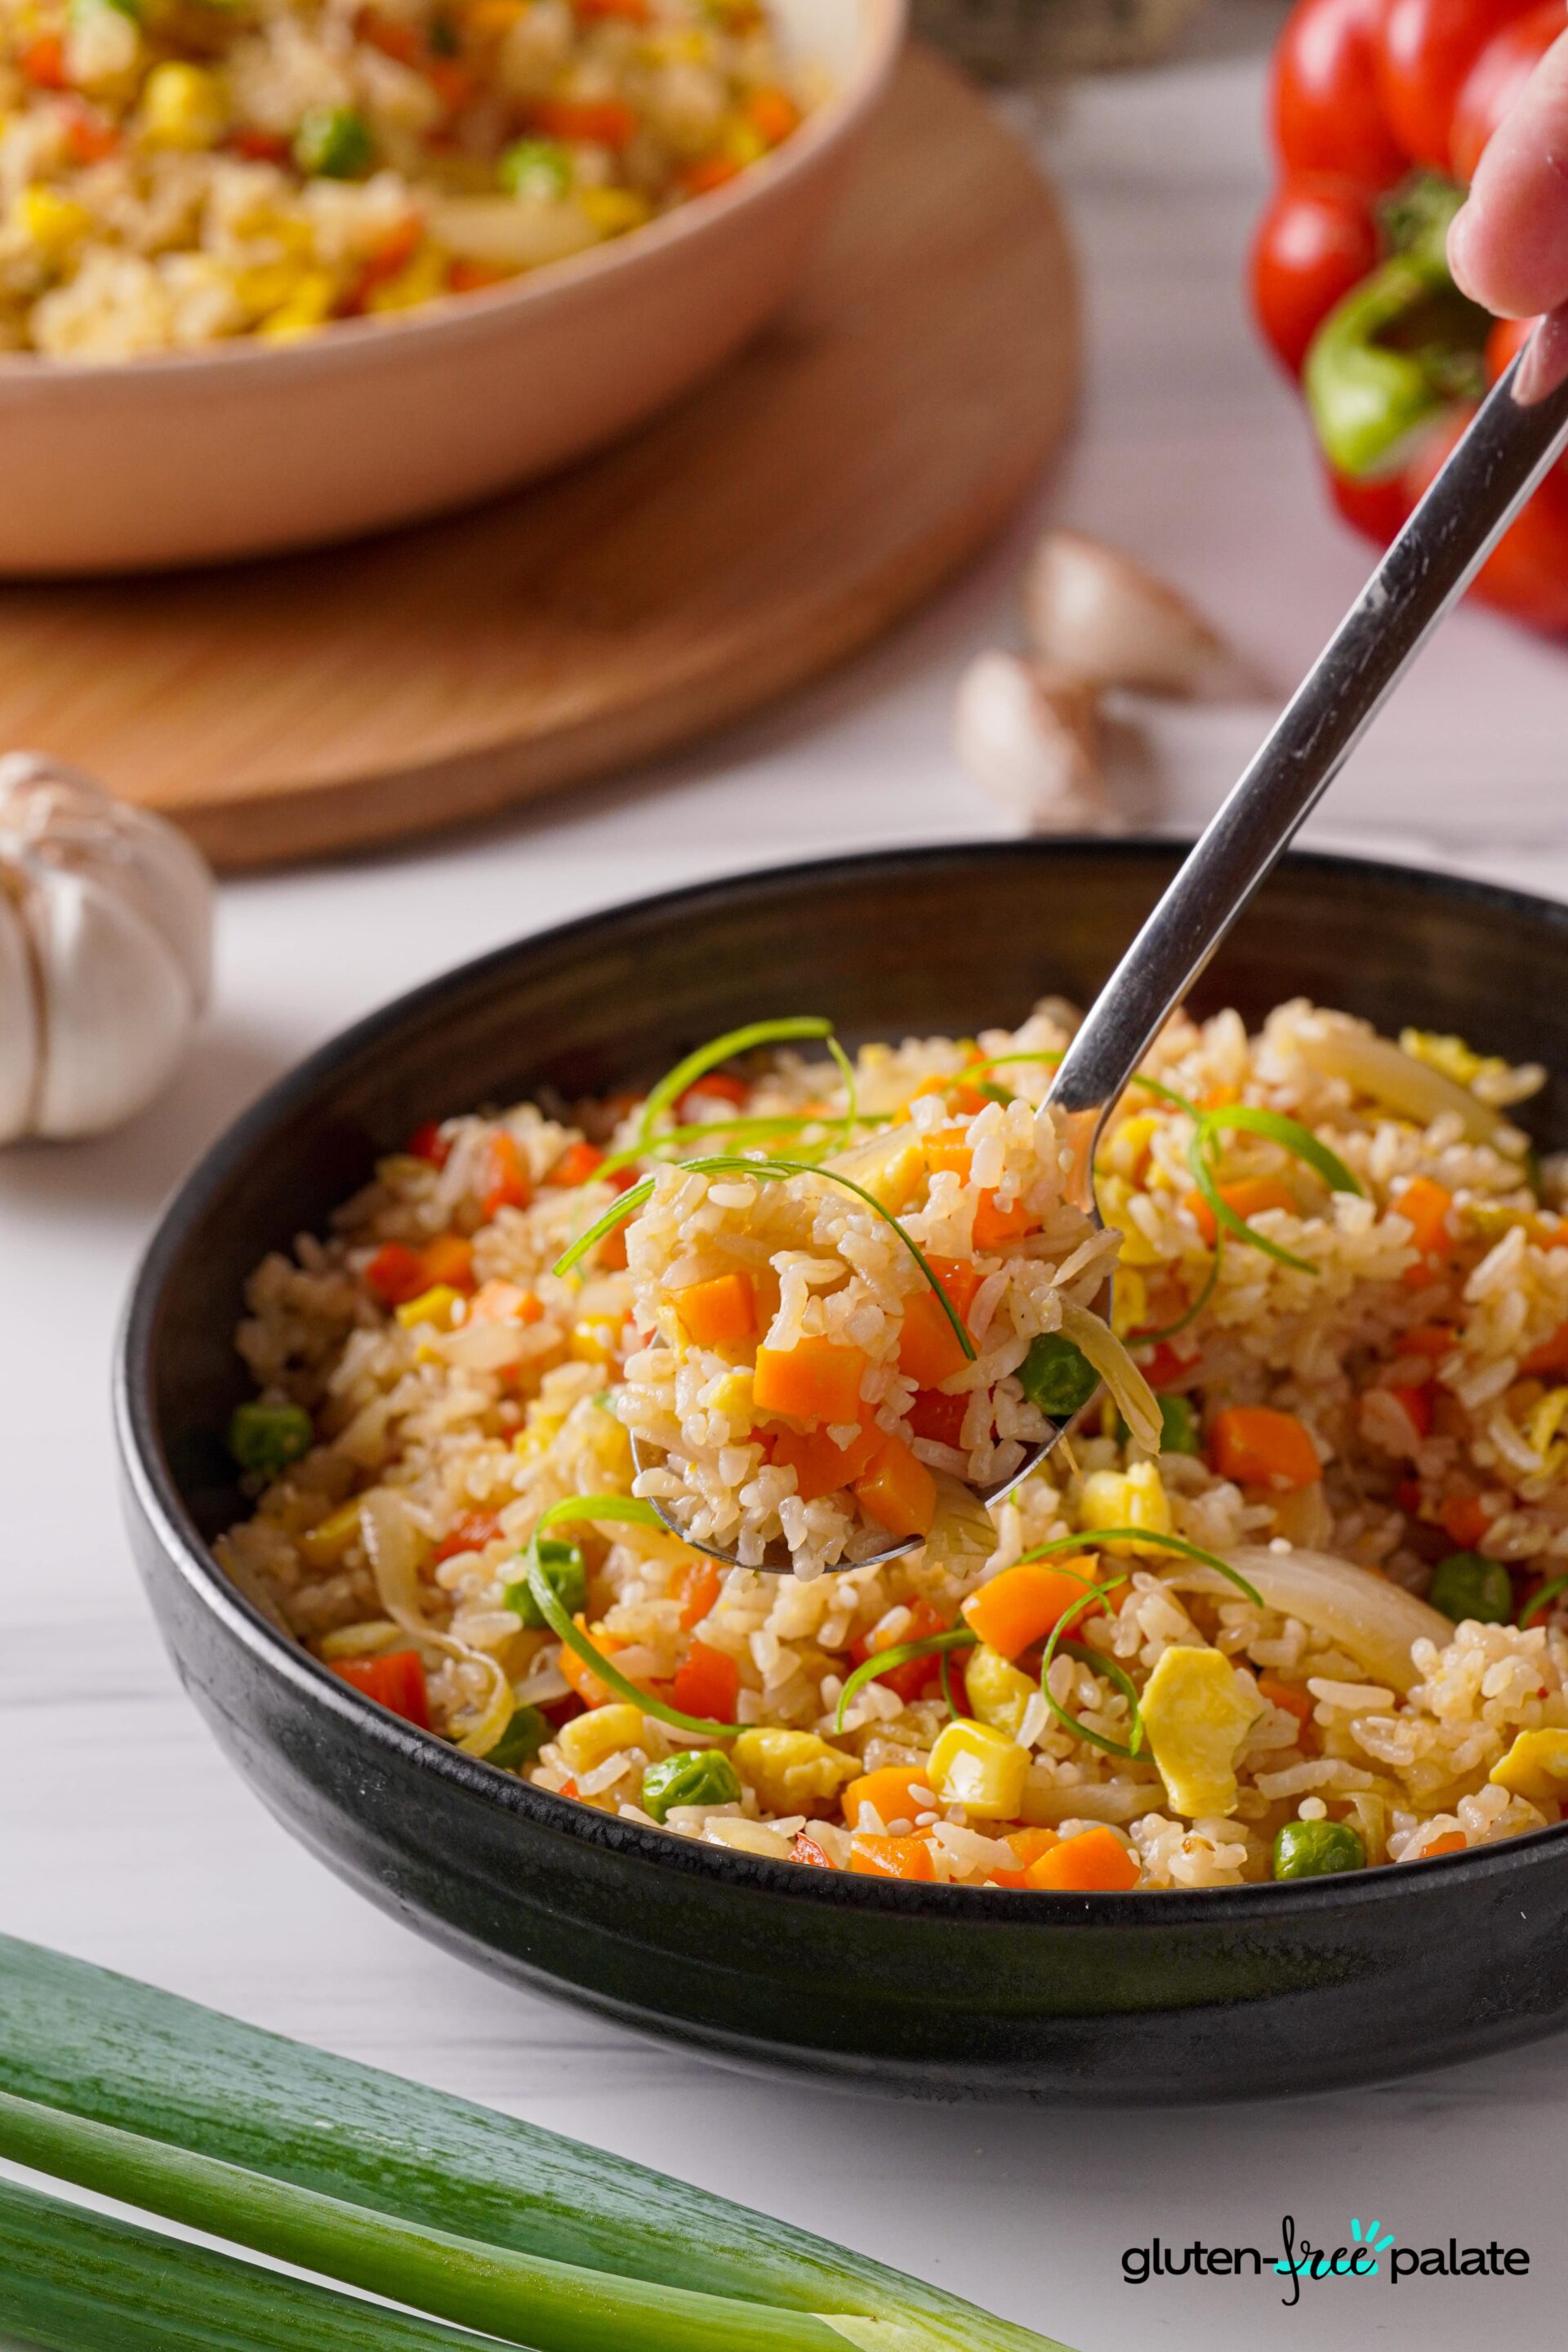 Gluten-free fried rice in a black bowl with a spoon in it.